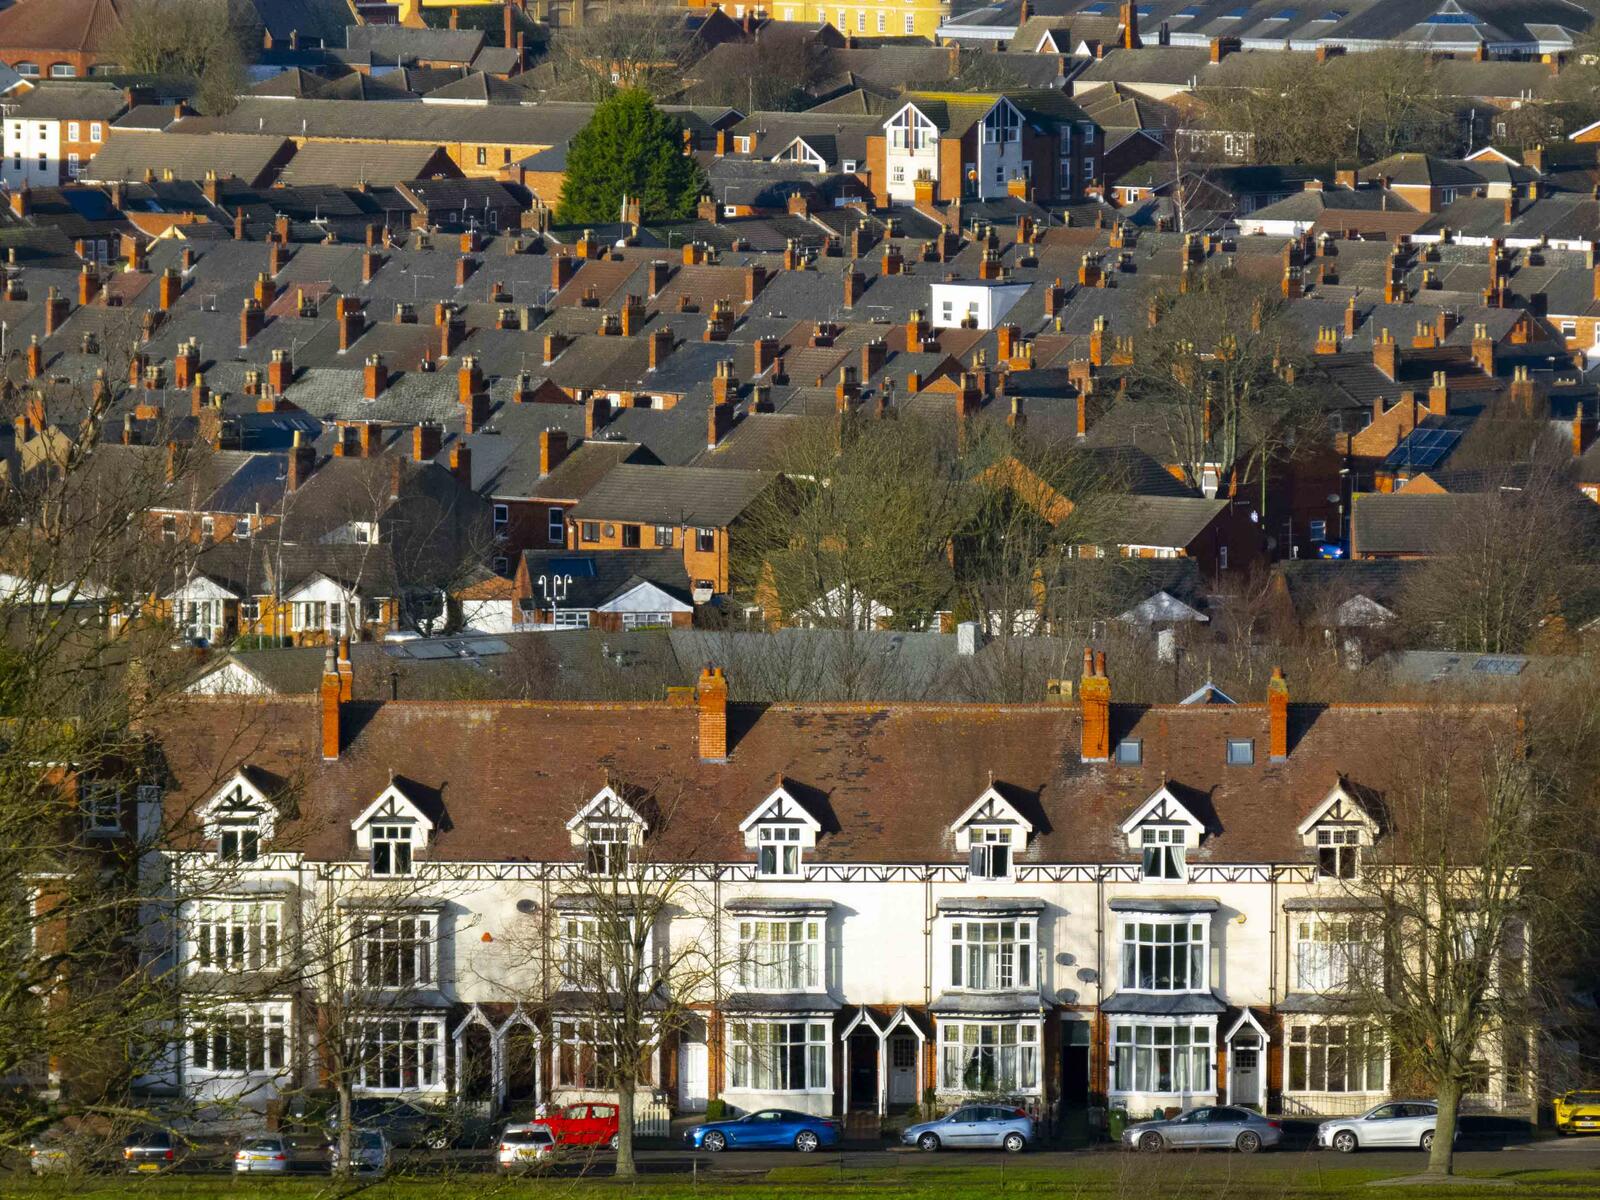 Image of roof tops in Lincoln